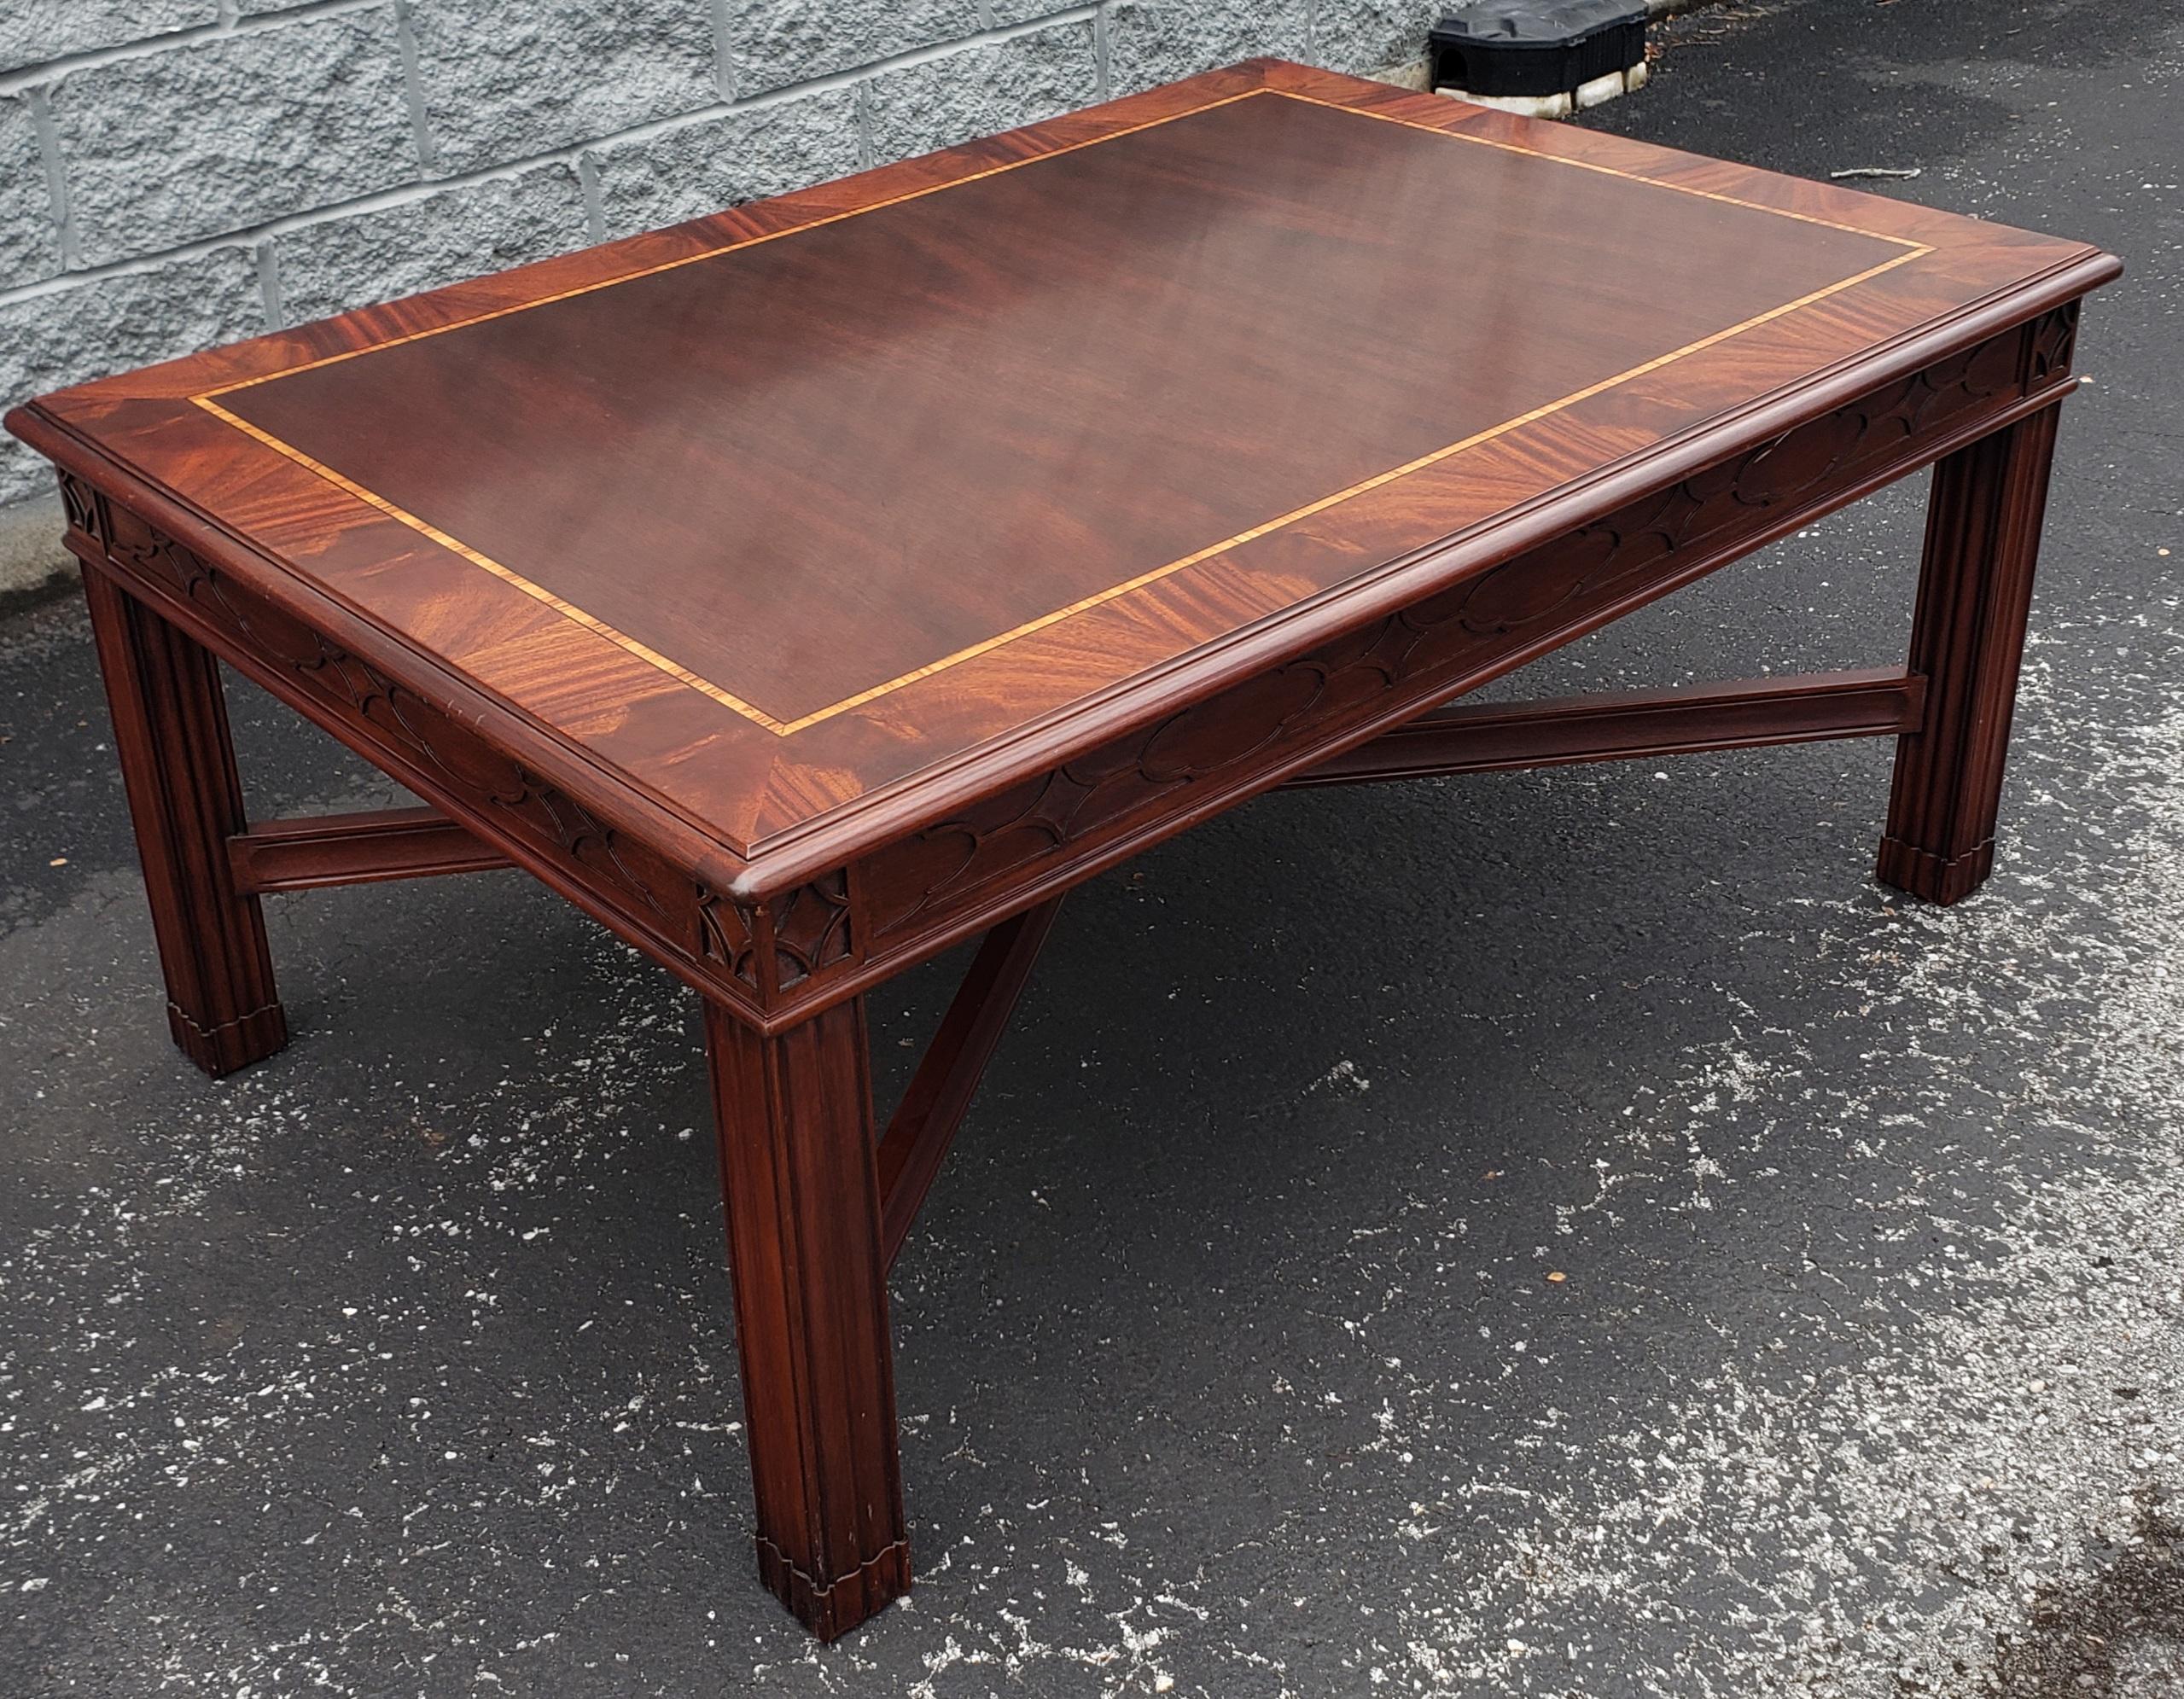 Henkel Harris Banded Flame Mahogany Satinwood Inlay Coffee Table with Fretwork.
Figured mahogany veneer top with crotch mahogany border with tulipwood
inlay and anigre separators. Apron has blind fret with Gothic motif and framed
diamond above legs.